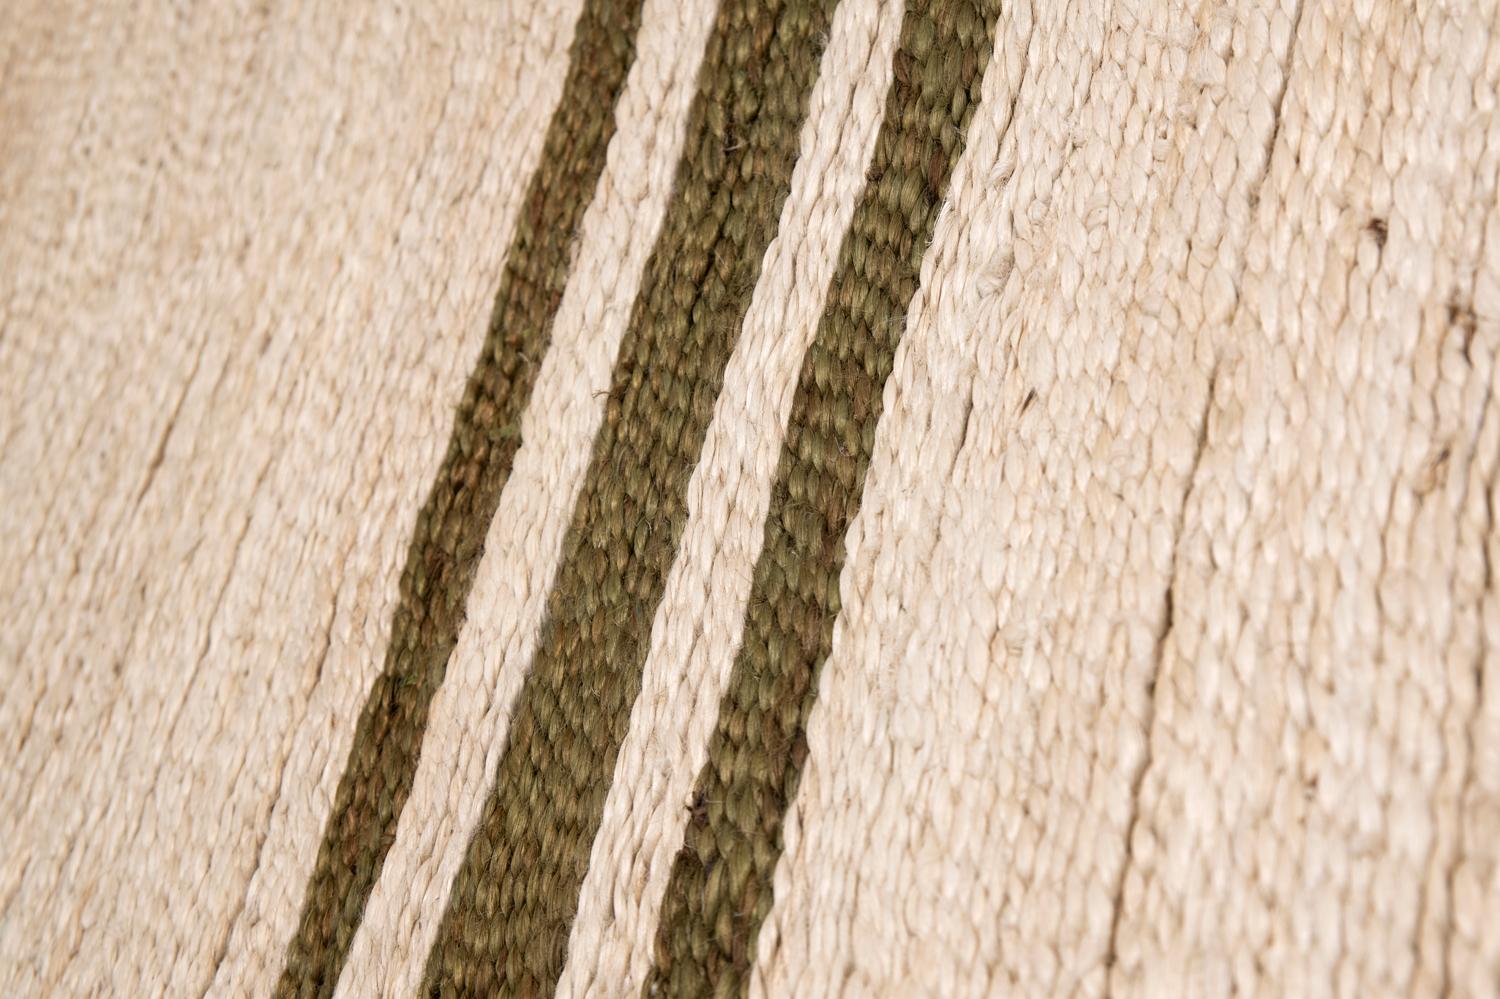 This jute rug has been ethically hand stitched in the finest jute yarns by artisans in Northern India, using a traditional weaving technique of this area.
Each rug is handwoven with irregular details to create beautiful imperfections that make each